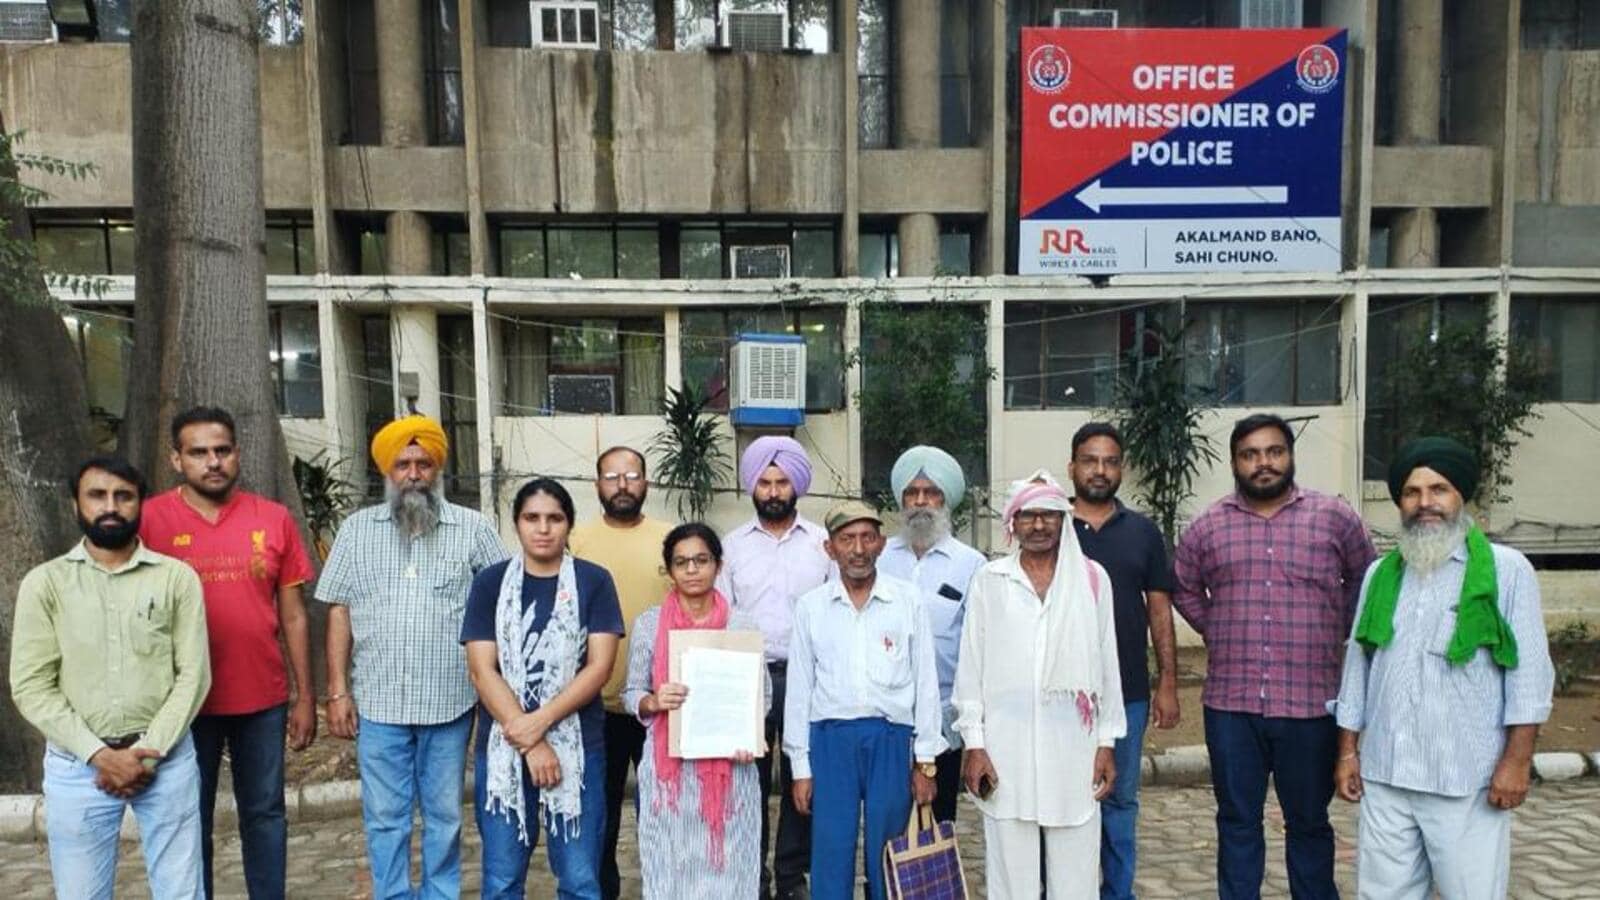 Ludhiana | FIR against minor, CP orders probe after labour unions file complaint